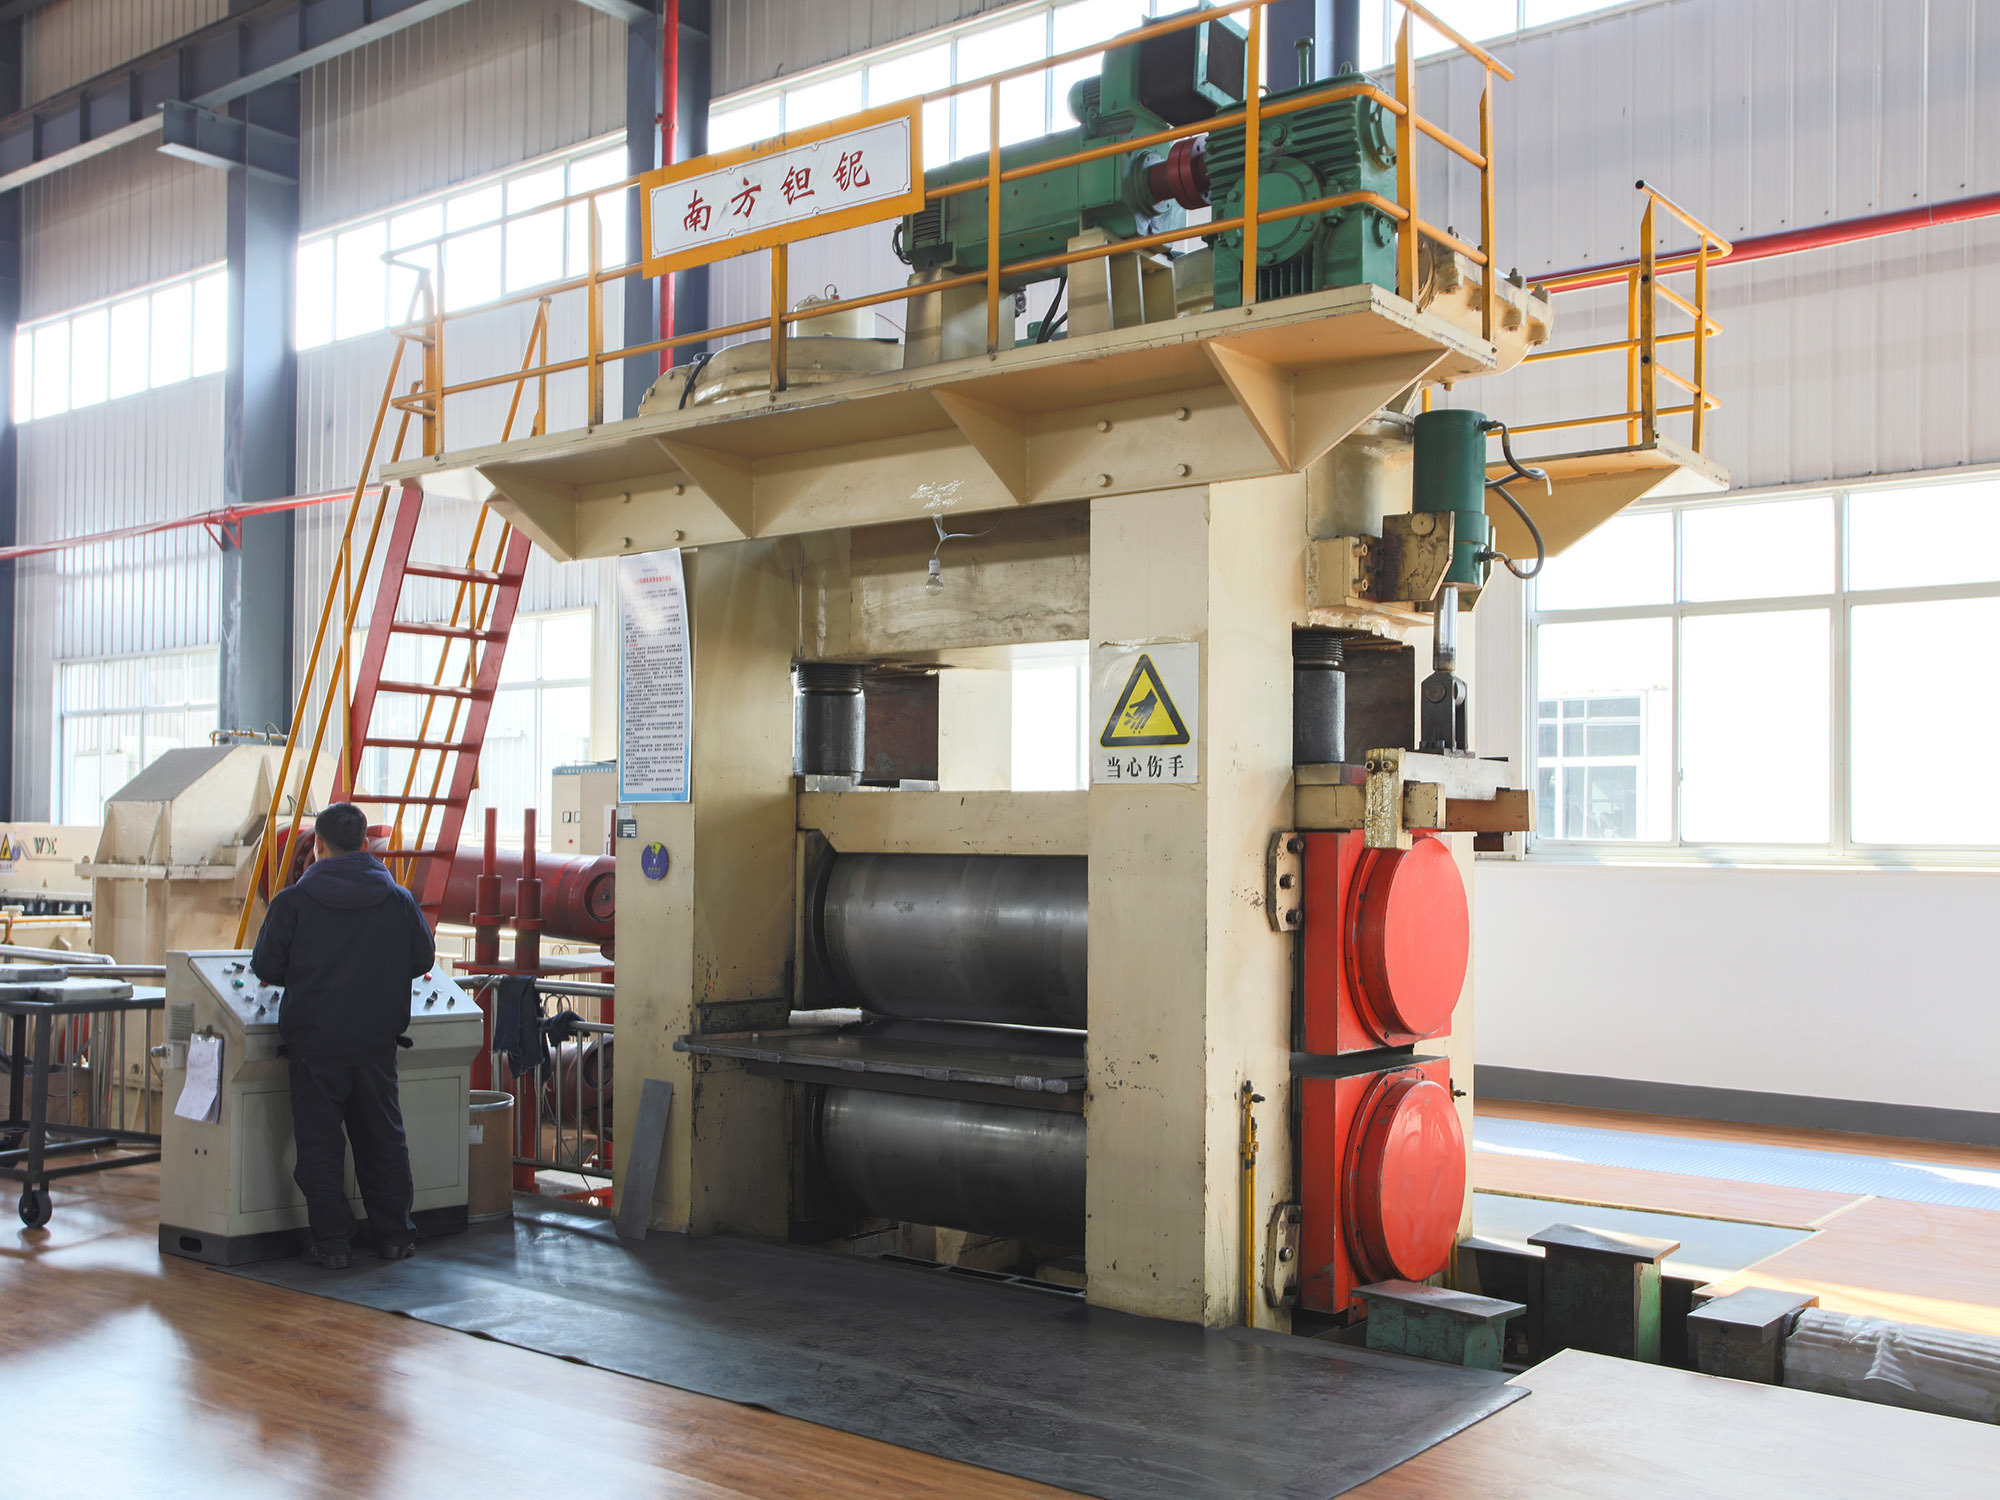 1.6 m wide plate mill